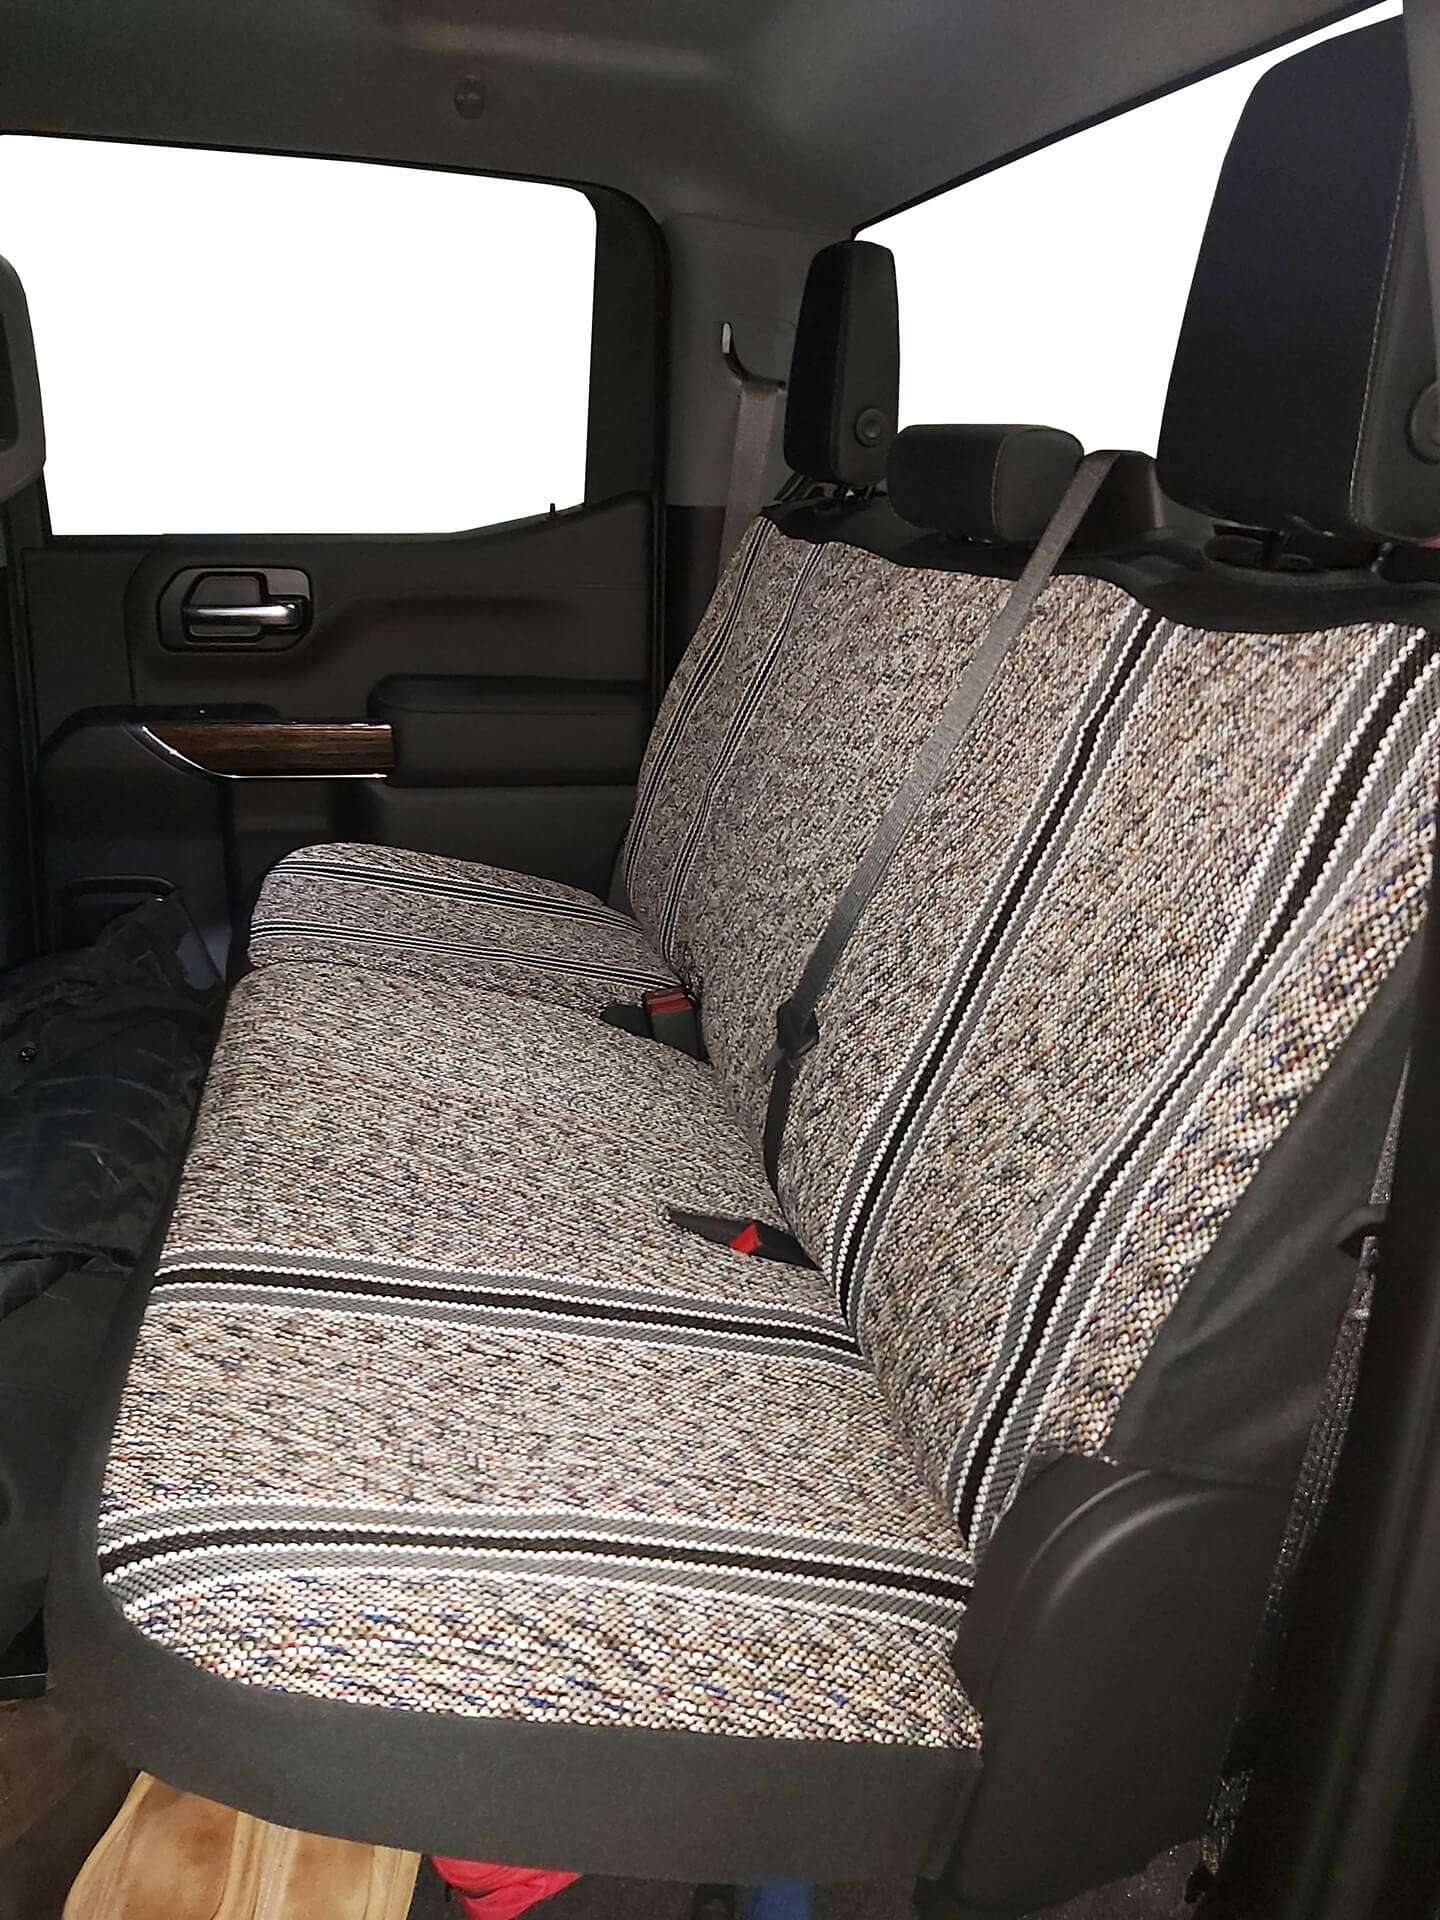 Gmc Sierra Seat Covers For Truck Western Cover - Gmc Sierra 1500 Truck Seat Covers